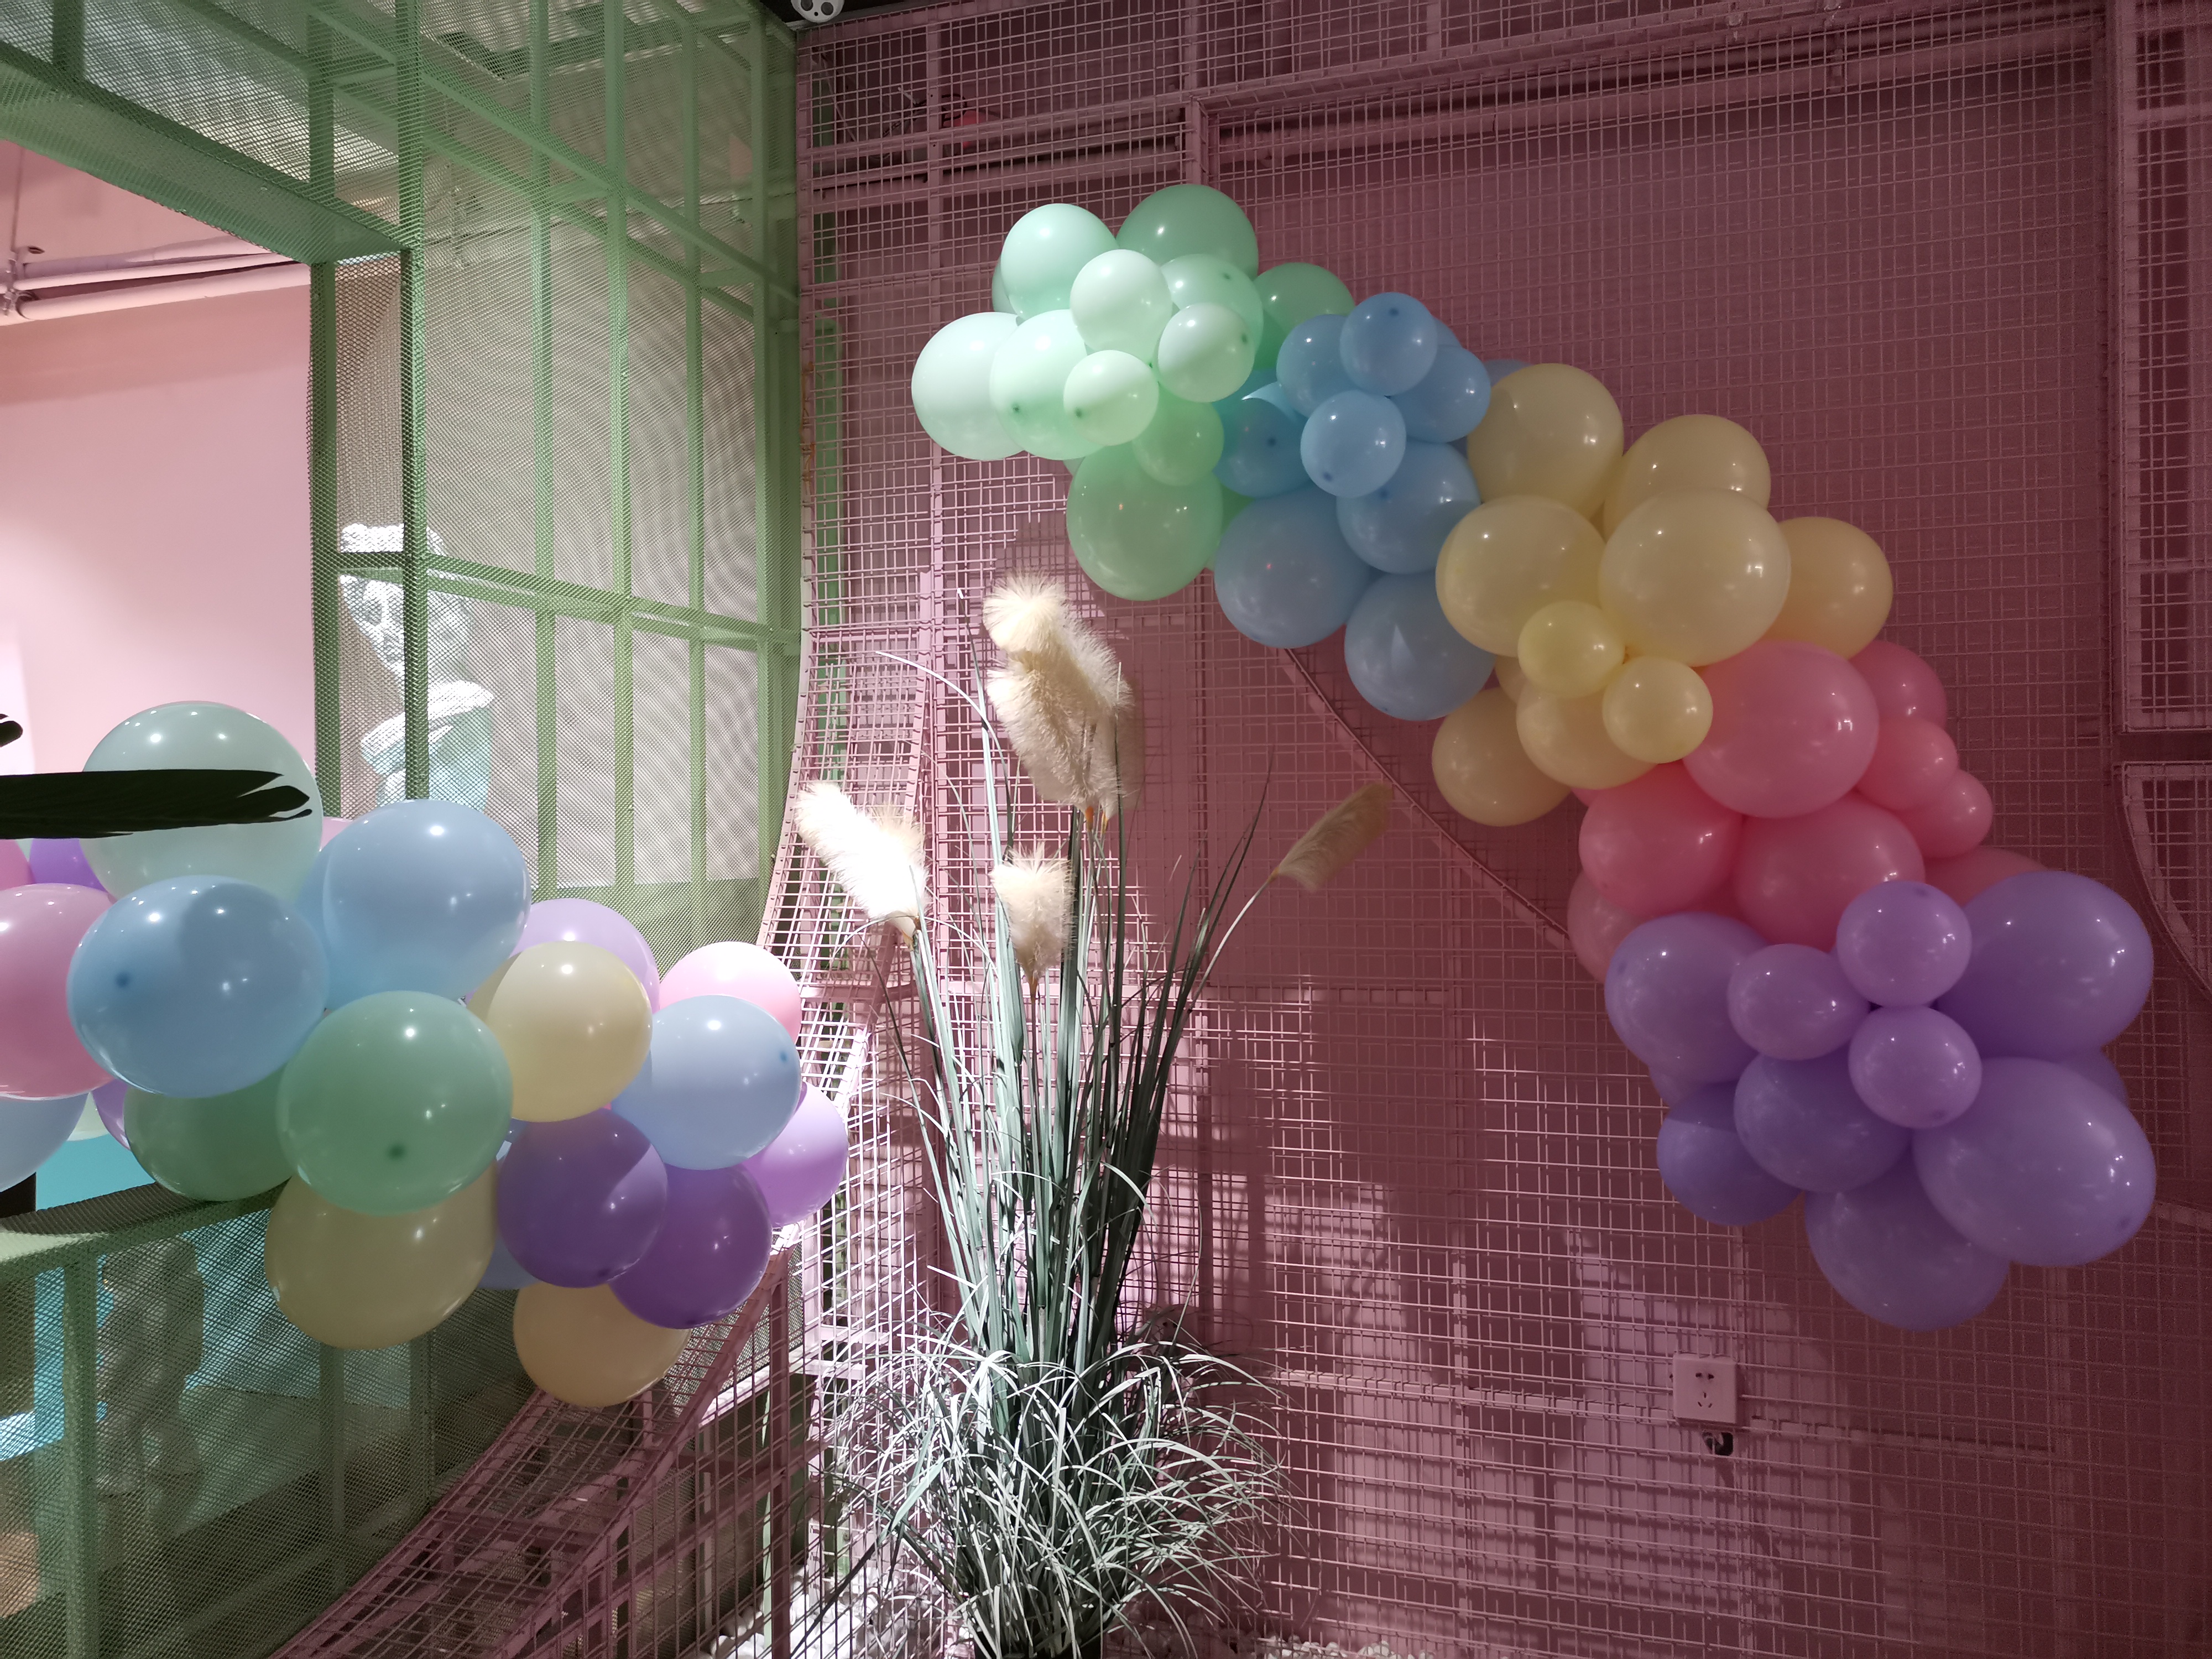 How many balloons are needed for a balloon arch?